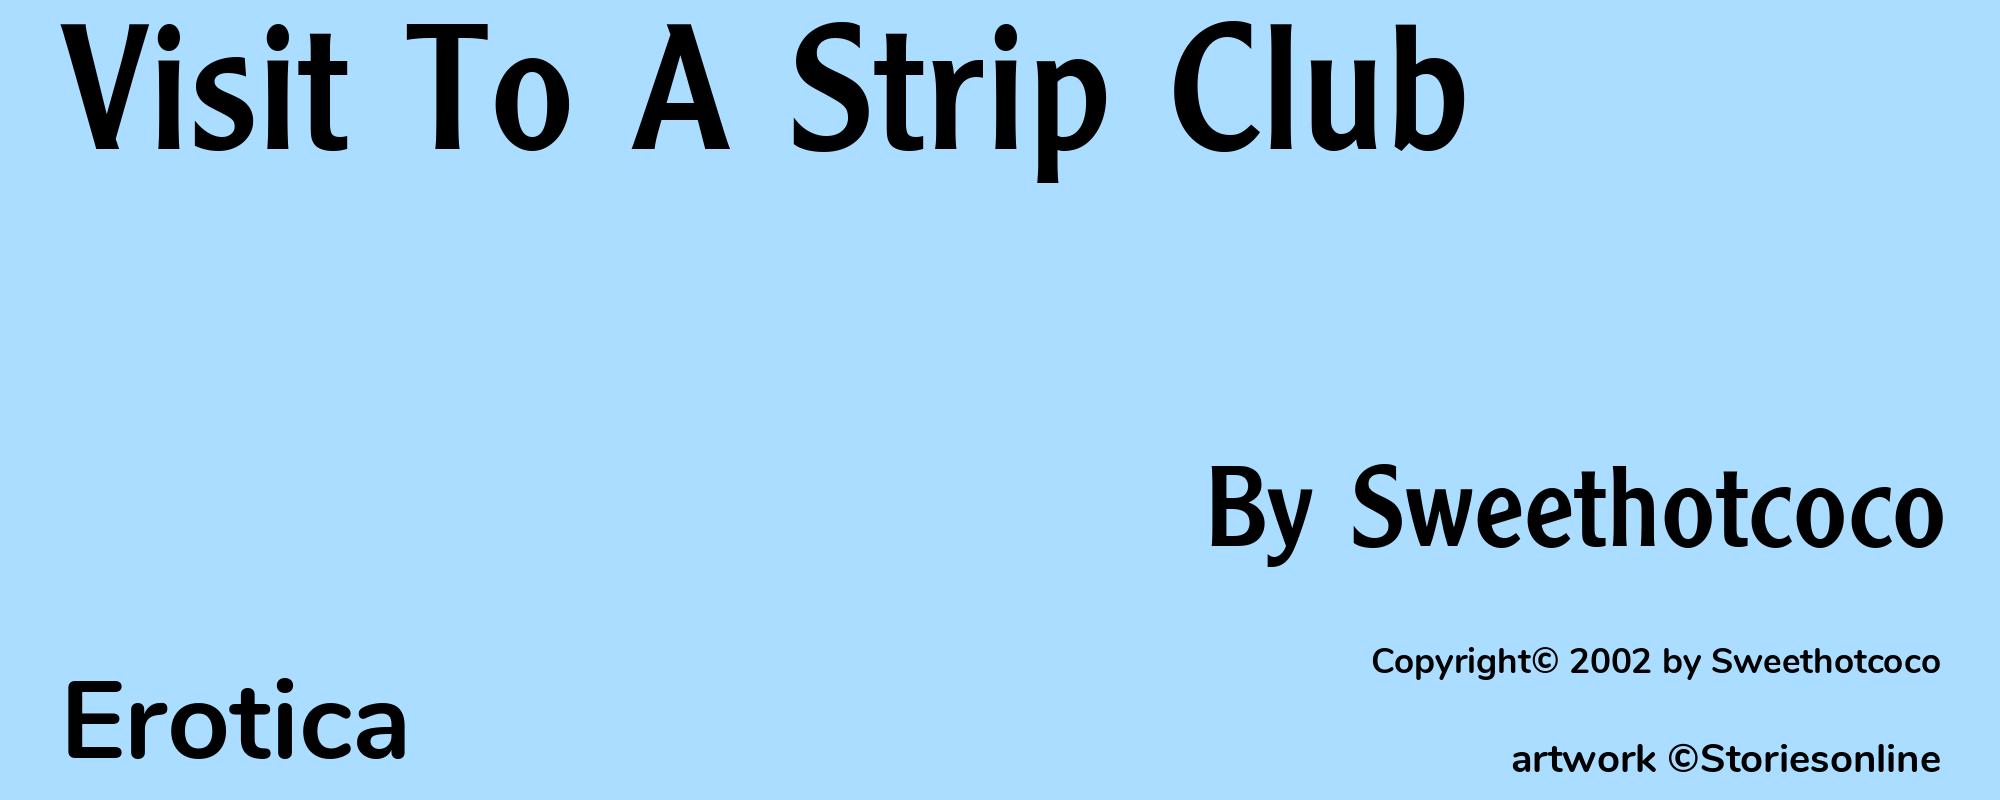 Visit To A Strip Club - Cover